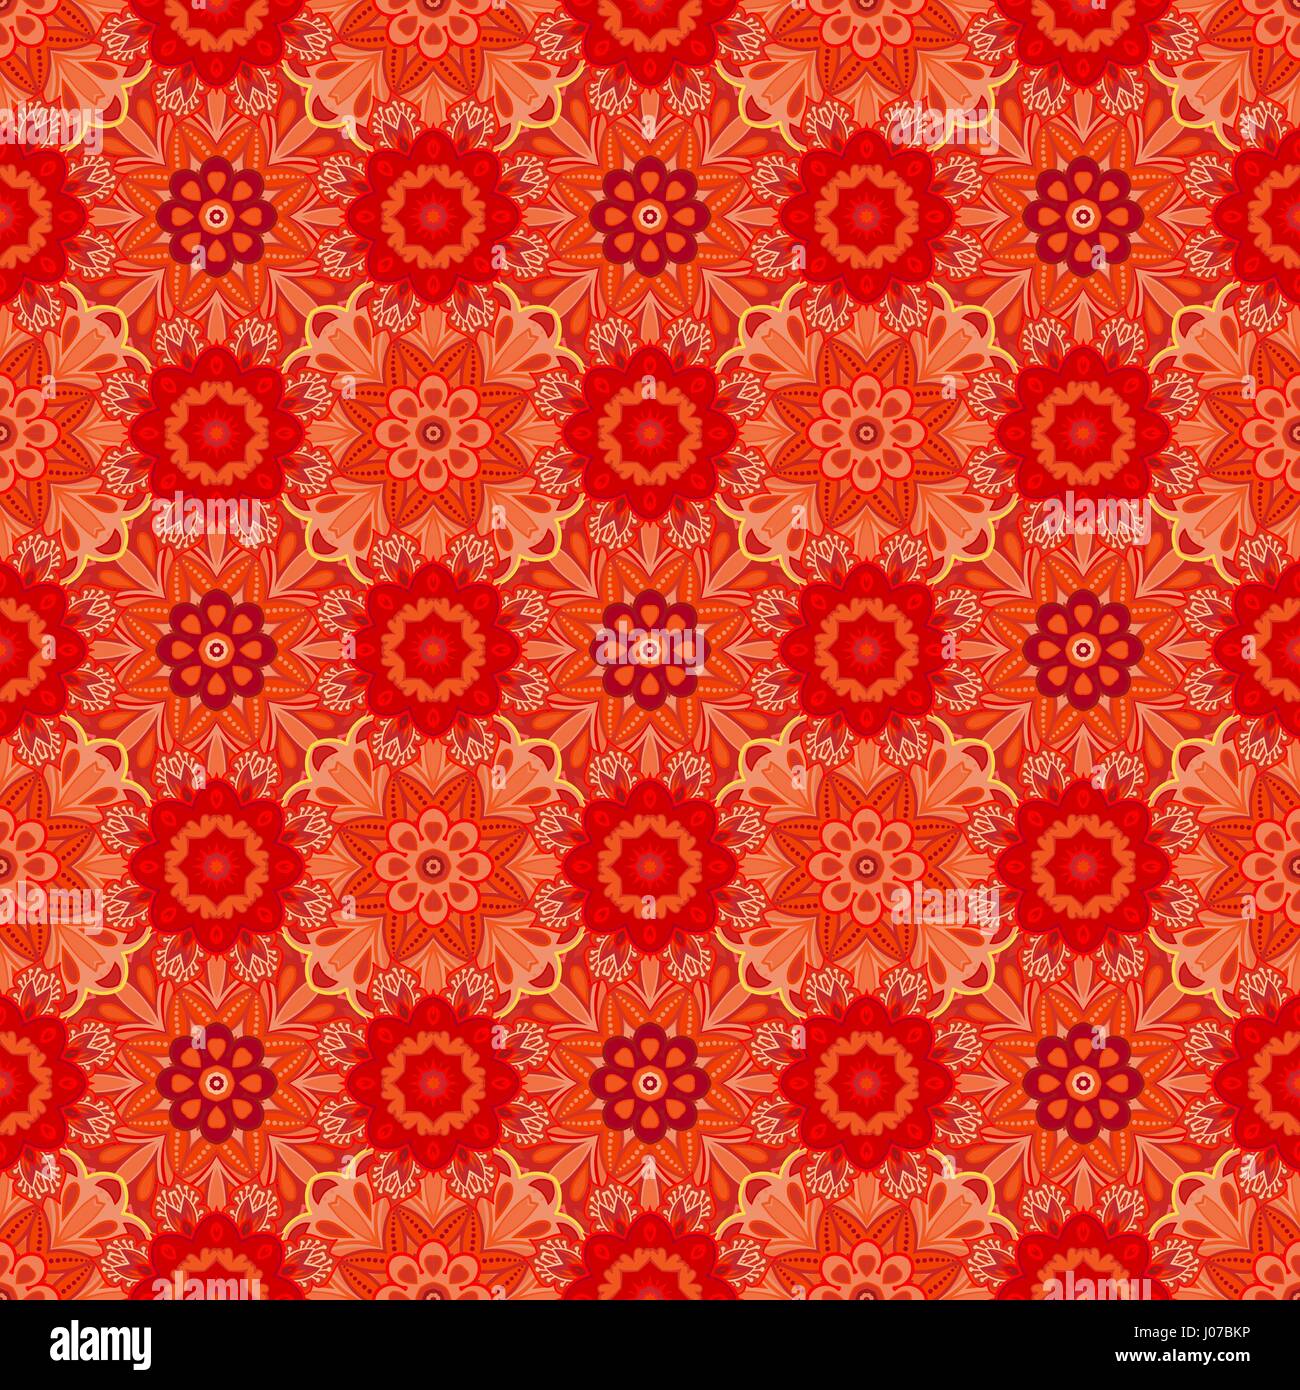 Oriental red pattern of mandalas. Vector rich ornament with floral elements. Template for textile, carpet, shawl. Stock Vector